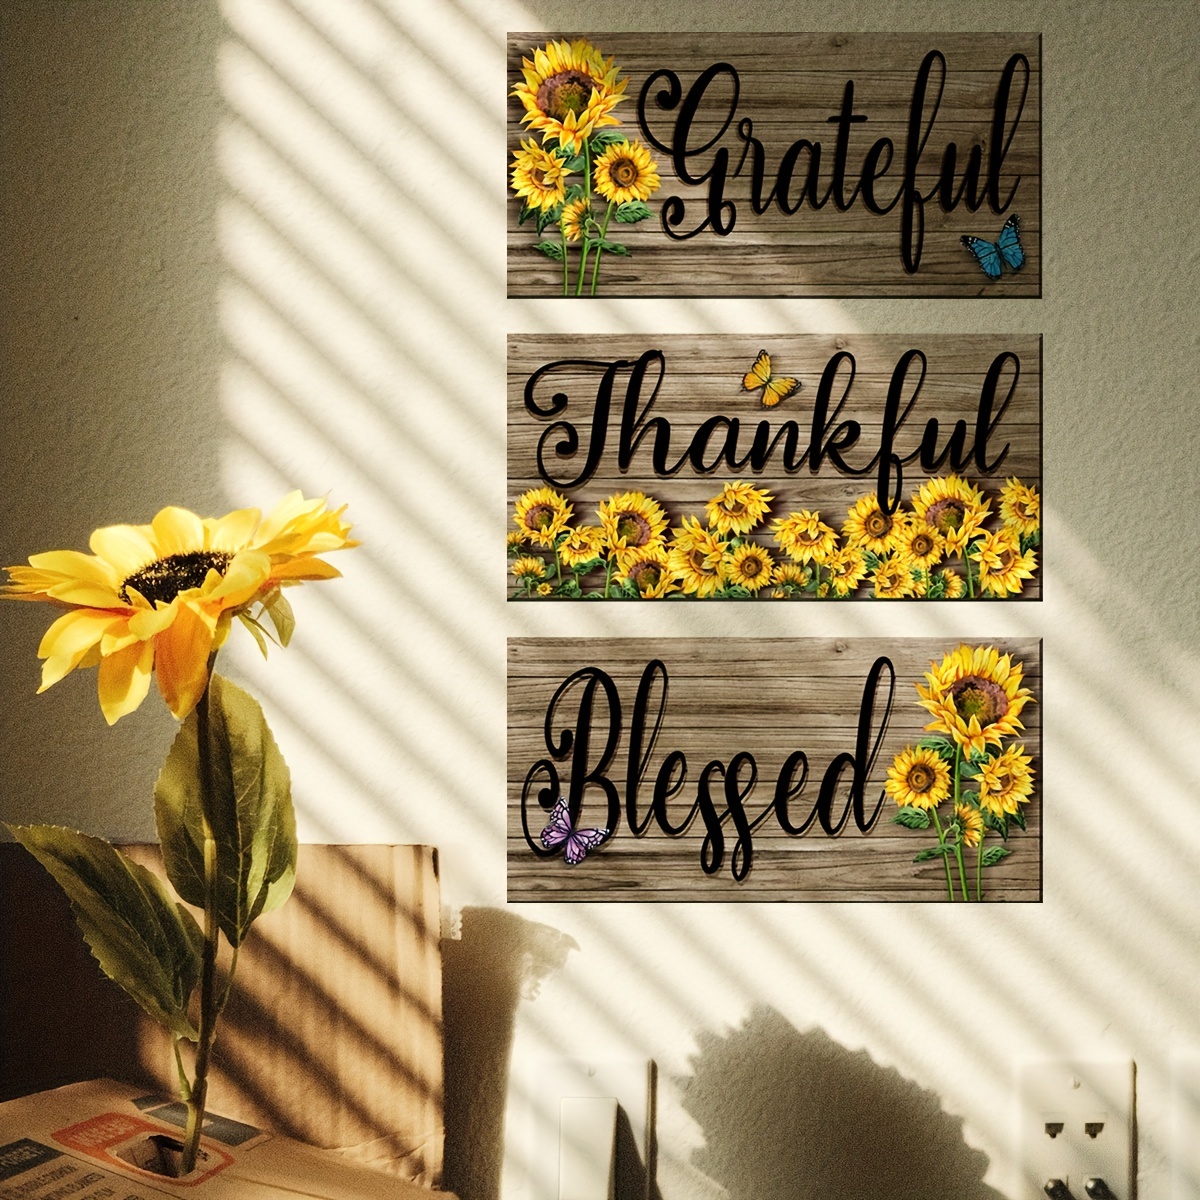  HANKCLES Rustic Kitchen Decor Sunflower Kitchen Wall Decor  Meals&Memories Made With Love Farmhouse Kitchen Canvas Wall Art Kitchen  Signs Wall Decor Kitchen Pictures Home Kitchen Decorations 12x16inch:  Posters & Prints